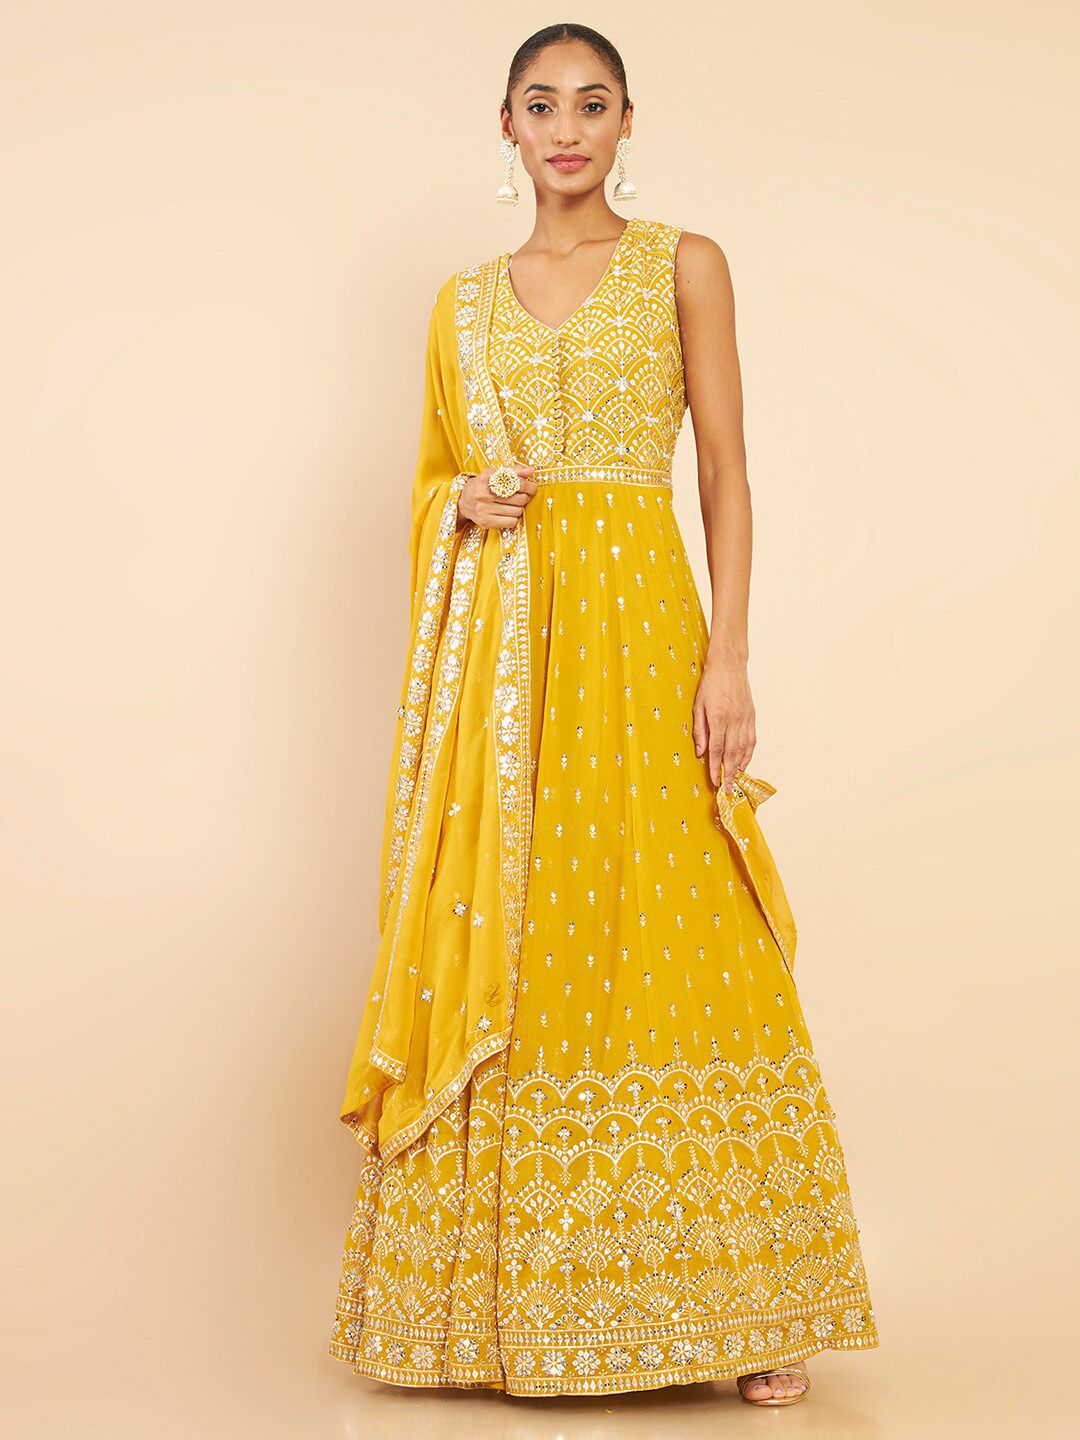 Soch Mustard Yellow Floral Georgette Ethnic Maxi Dress Price in India